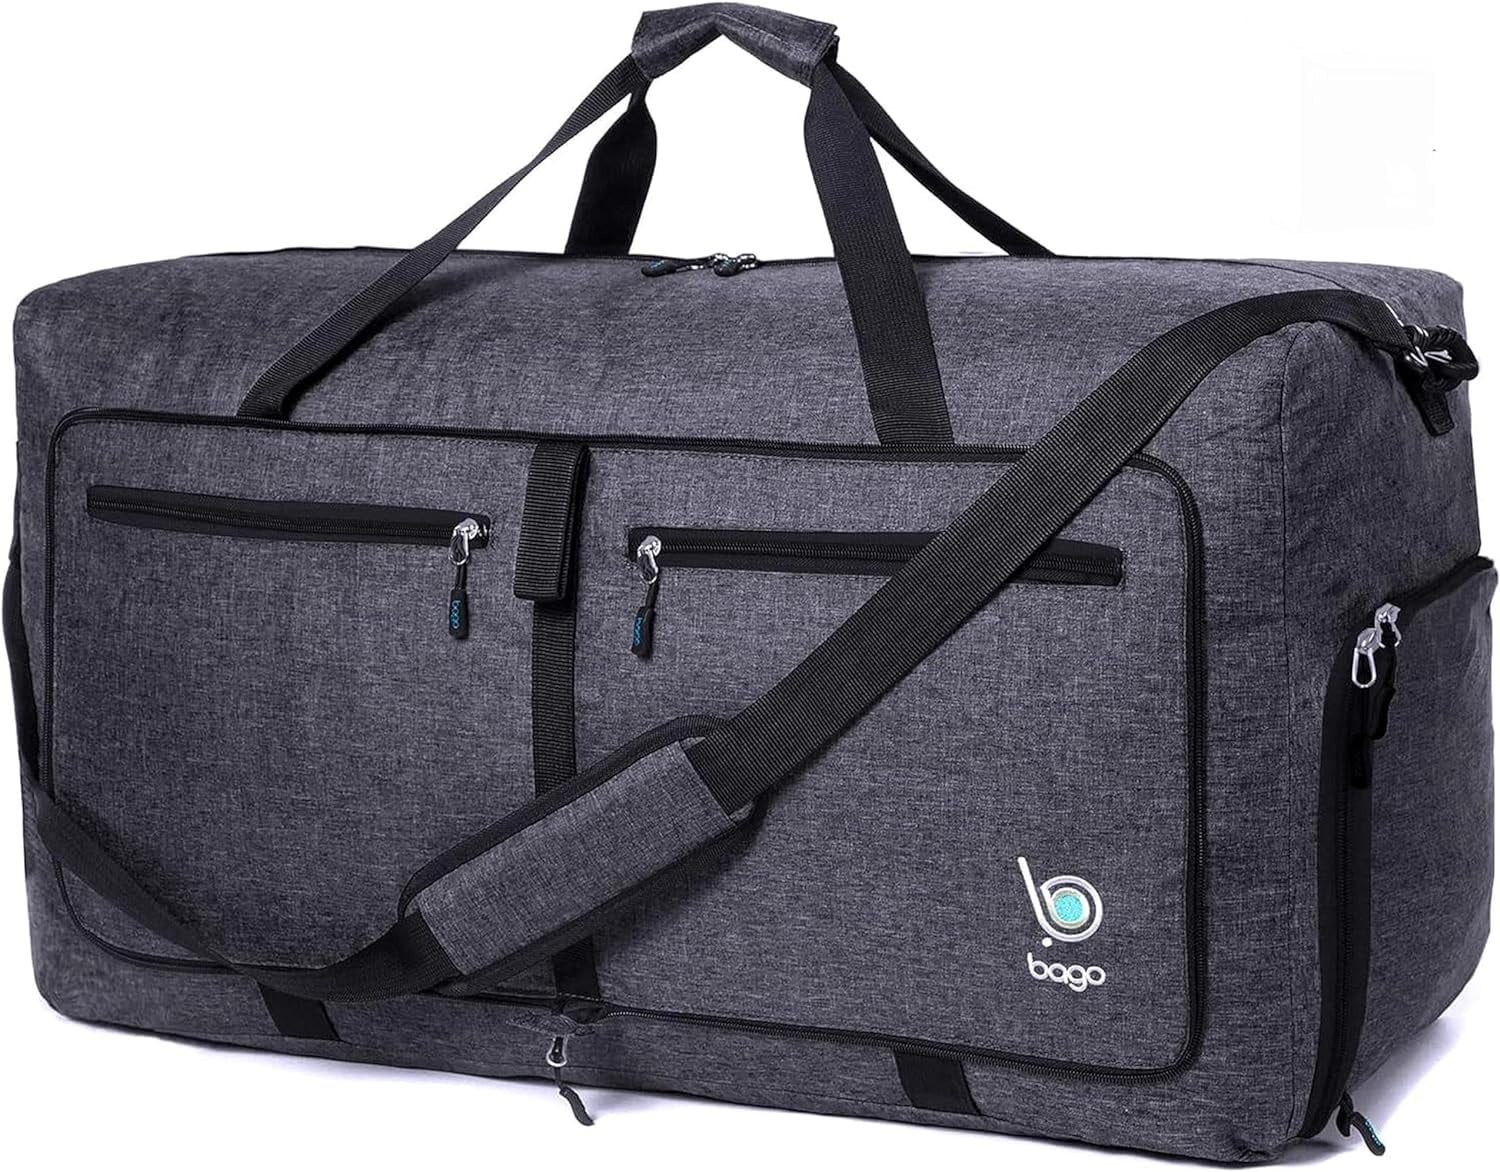 <p><a href="http://www.amazon.com/Travel-Duffel-Traveling-Foldable-Weekender/dp/B08DH2ZG13?th=1" class="ga-track"><strong>Bago Travel Duffel Bags</strong></a> ($27, originally $30)</p> <p>When you've planned a longer trip, having a bigger bag that can hold more obviously makes sense. But you don't want it to be too bulky, especially if you'll be juggling kiddies, too. This weekender finds that perfect balance! With 80L capacity, this bag has several outside pockets to help organize everything and to keep your smaller items organized and accessible.</p> <p><strong>What reviewers say</strong>: "Great, durable, large soft-sided duffel bag. I recommend getting luggage straps because the bag does not have any internal straps to hold your belongings together. If you stuff the bag full, you will not need them. The bag is very light so you are only carrying the weight of your belongings. The bag went through airport baggage with any issues. And we love that it stores in a small zipped up square." </p>